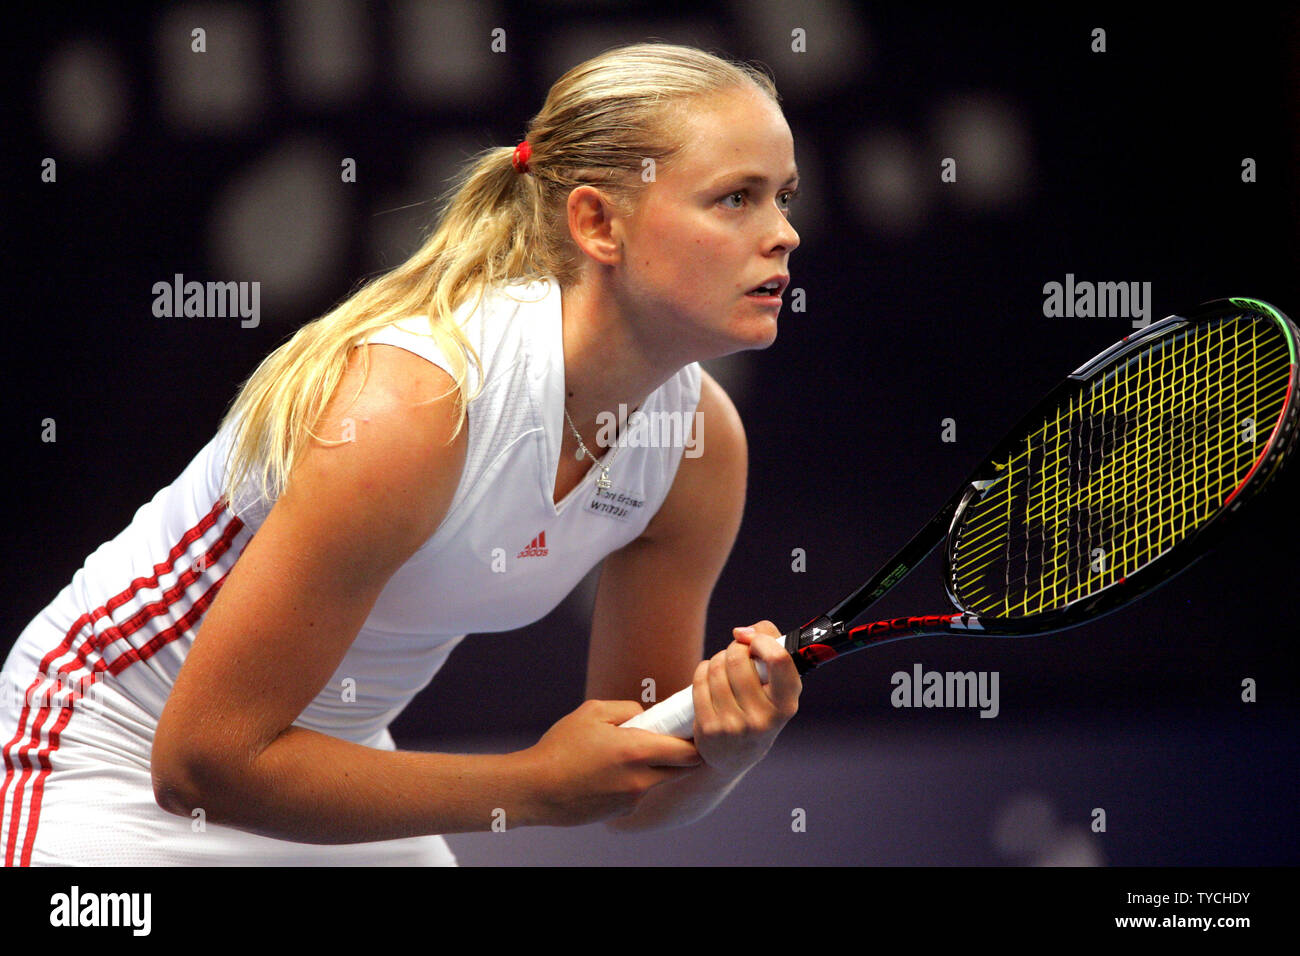 German tennis star Anna-Lena Groenefeld, 23rd ranked on WTA Tour, waits serve during semifinal win over Dinara Safina of Russia (6-4, 5-7, 6-4) at Fortis Championships WTA women's tennis tournament ($585,000 Tier II) at Luxembourg on October 1, 2005.  (UPI Photo/Tom Theobald) Stock Photo